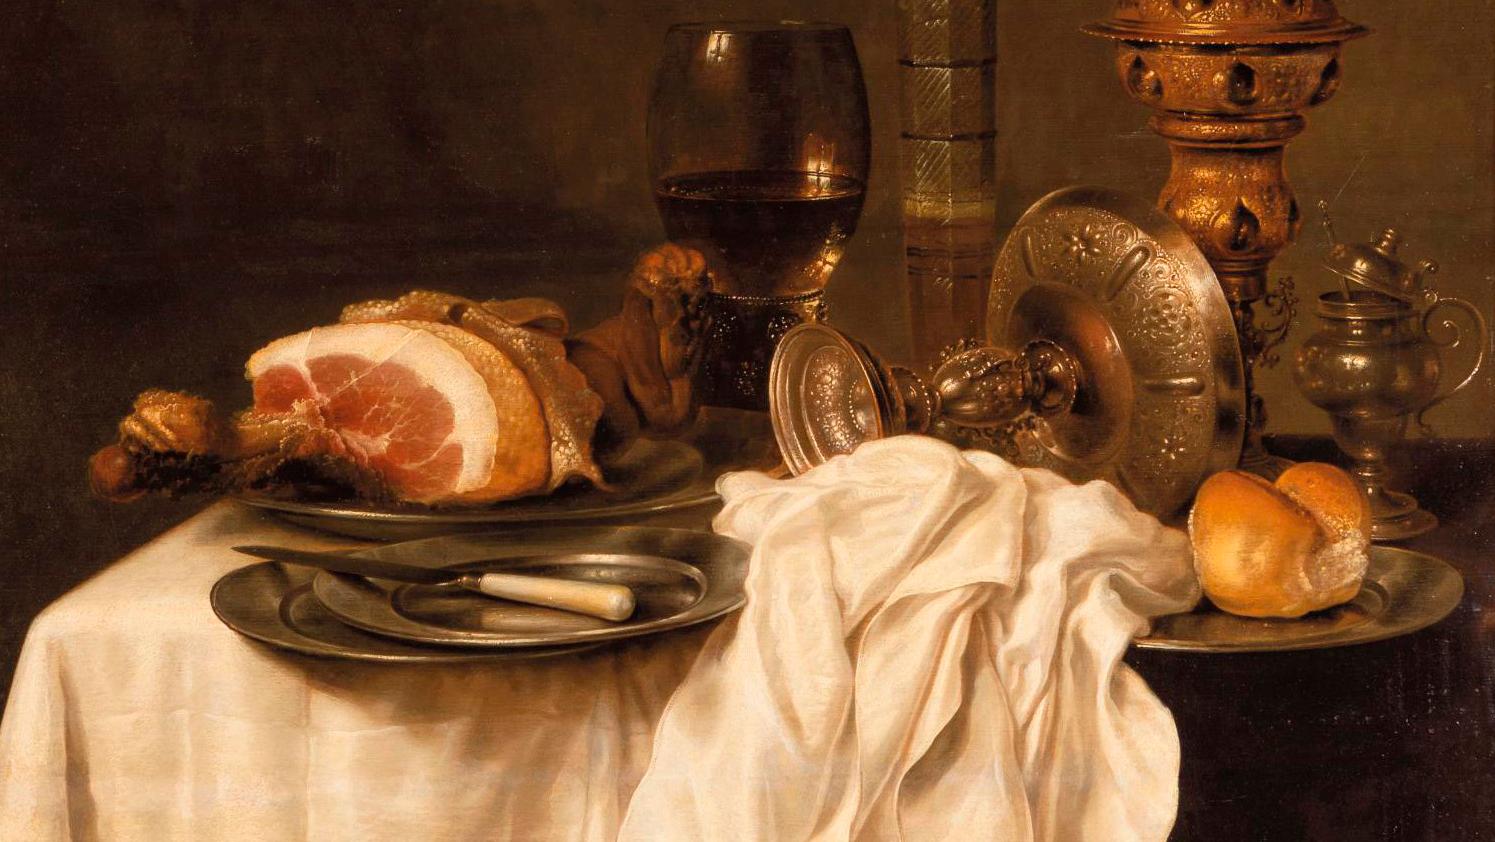 Willem Claesz Heda (1594/1595-1680), Still Life with Ham, Beer Glass and Silverware,... Willem Claesz Heda and Louis Hersent, Winners of the Day